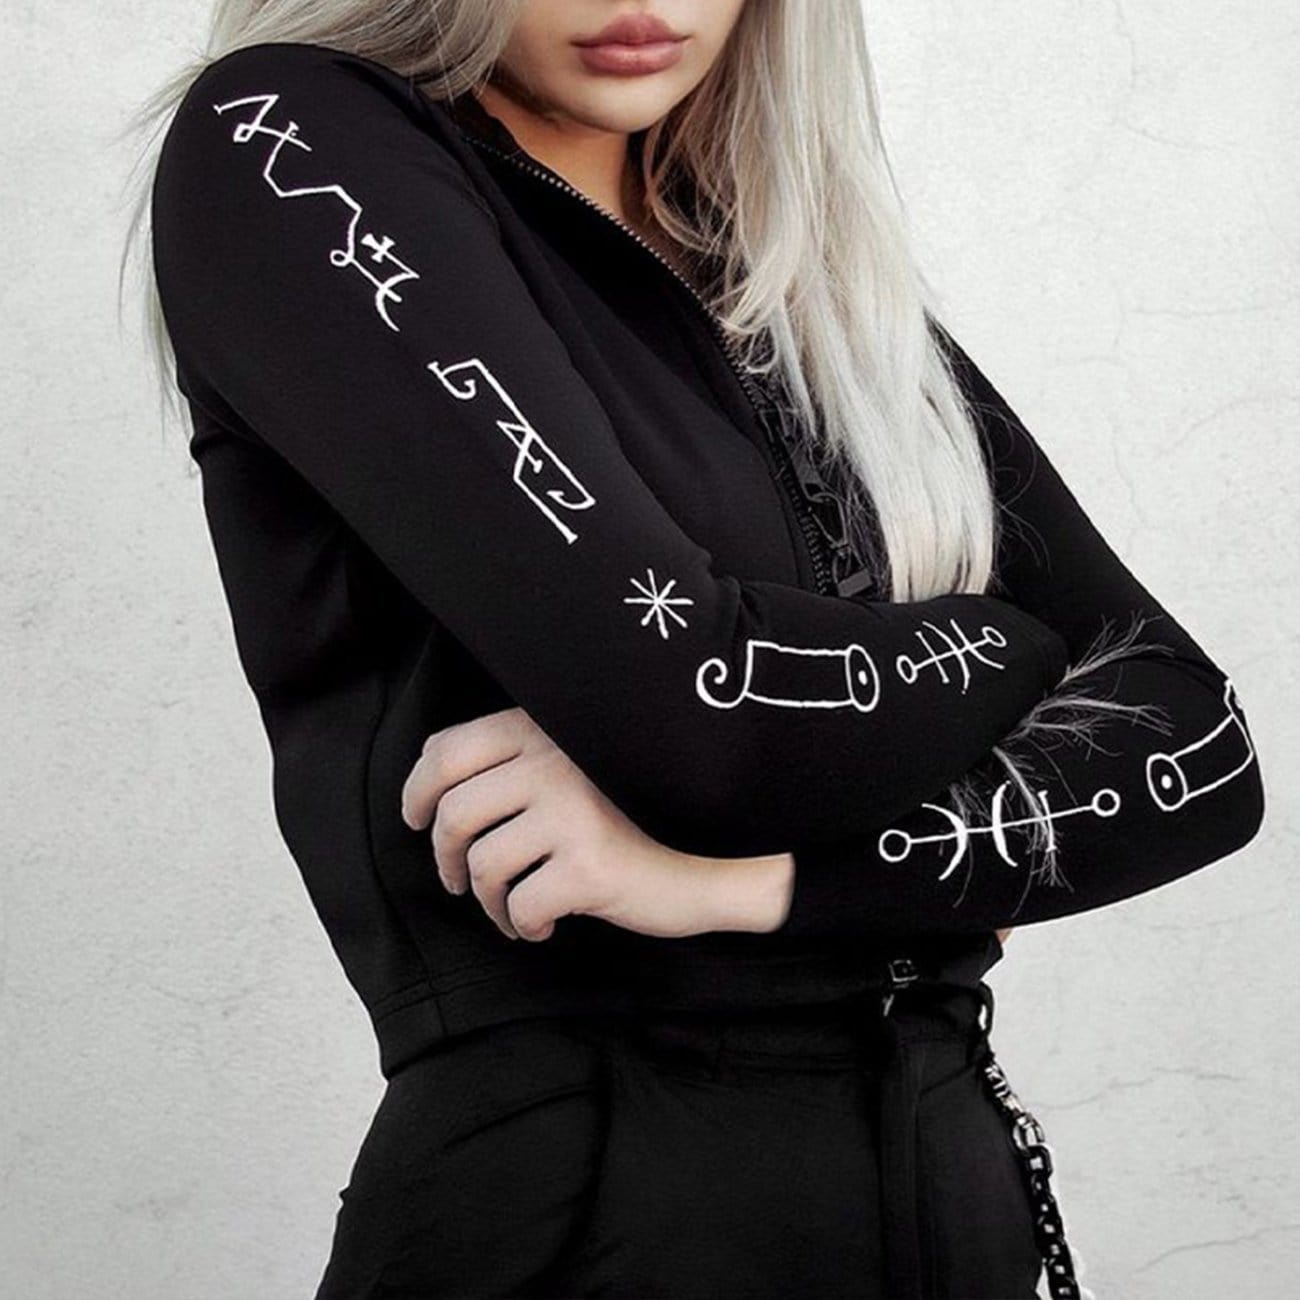 TO Dark Personality Side Graffiti Cropped Long Sleeve Tee